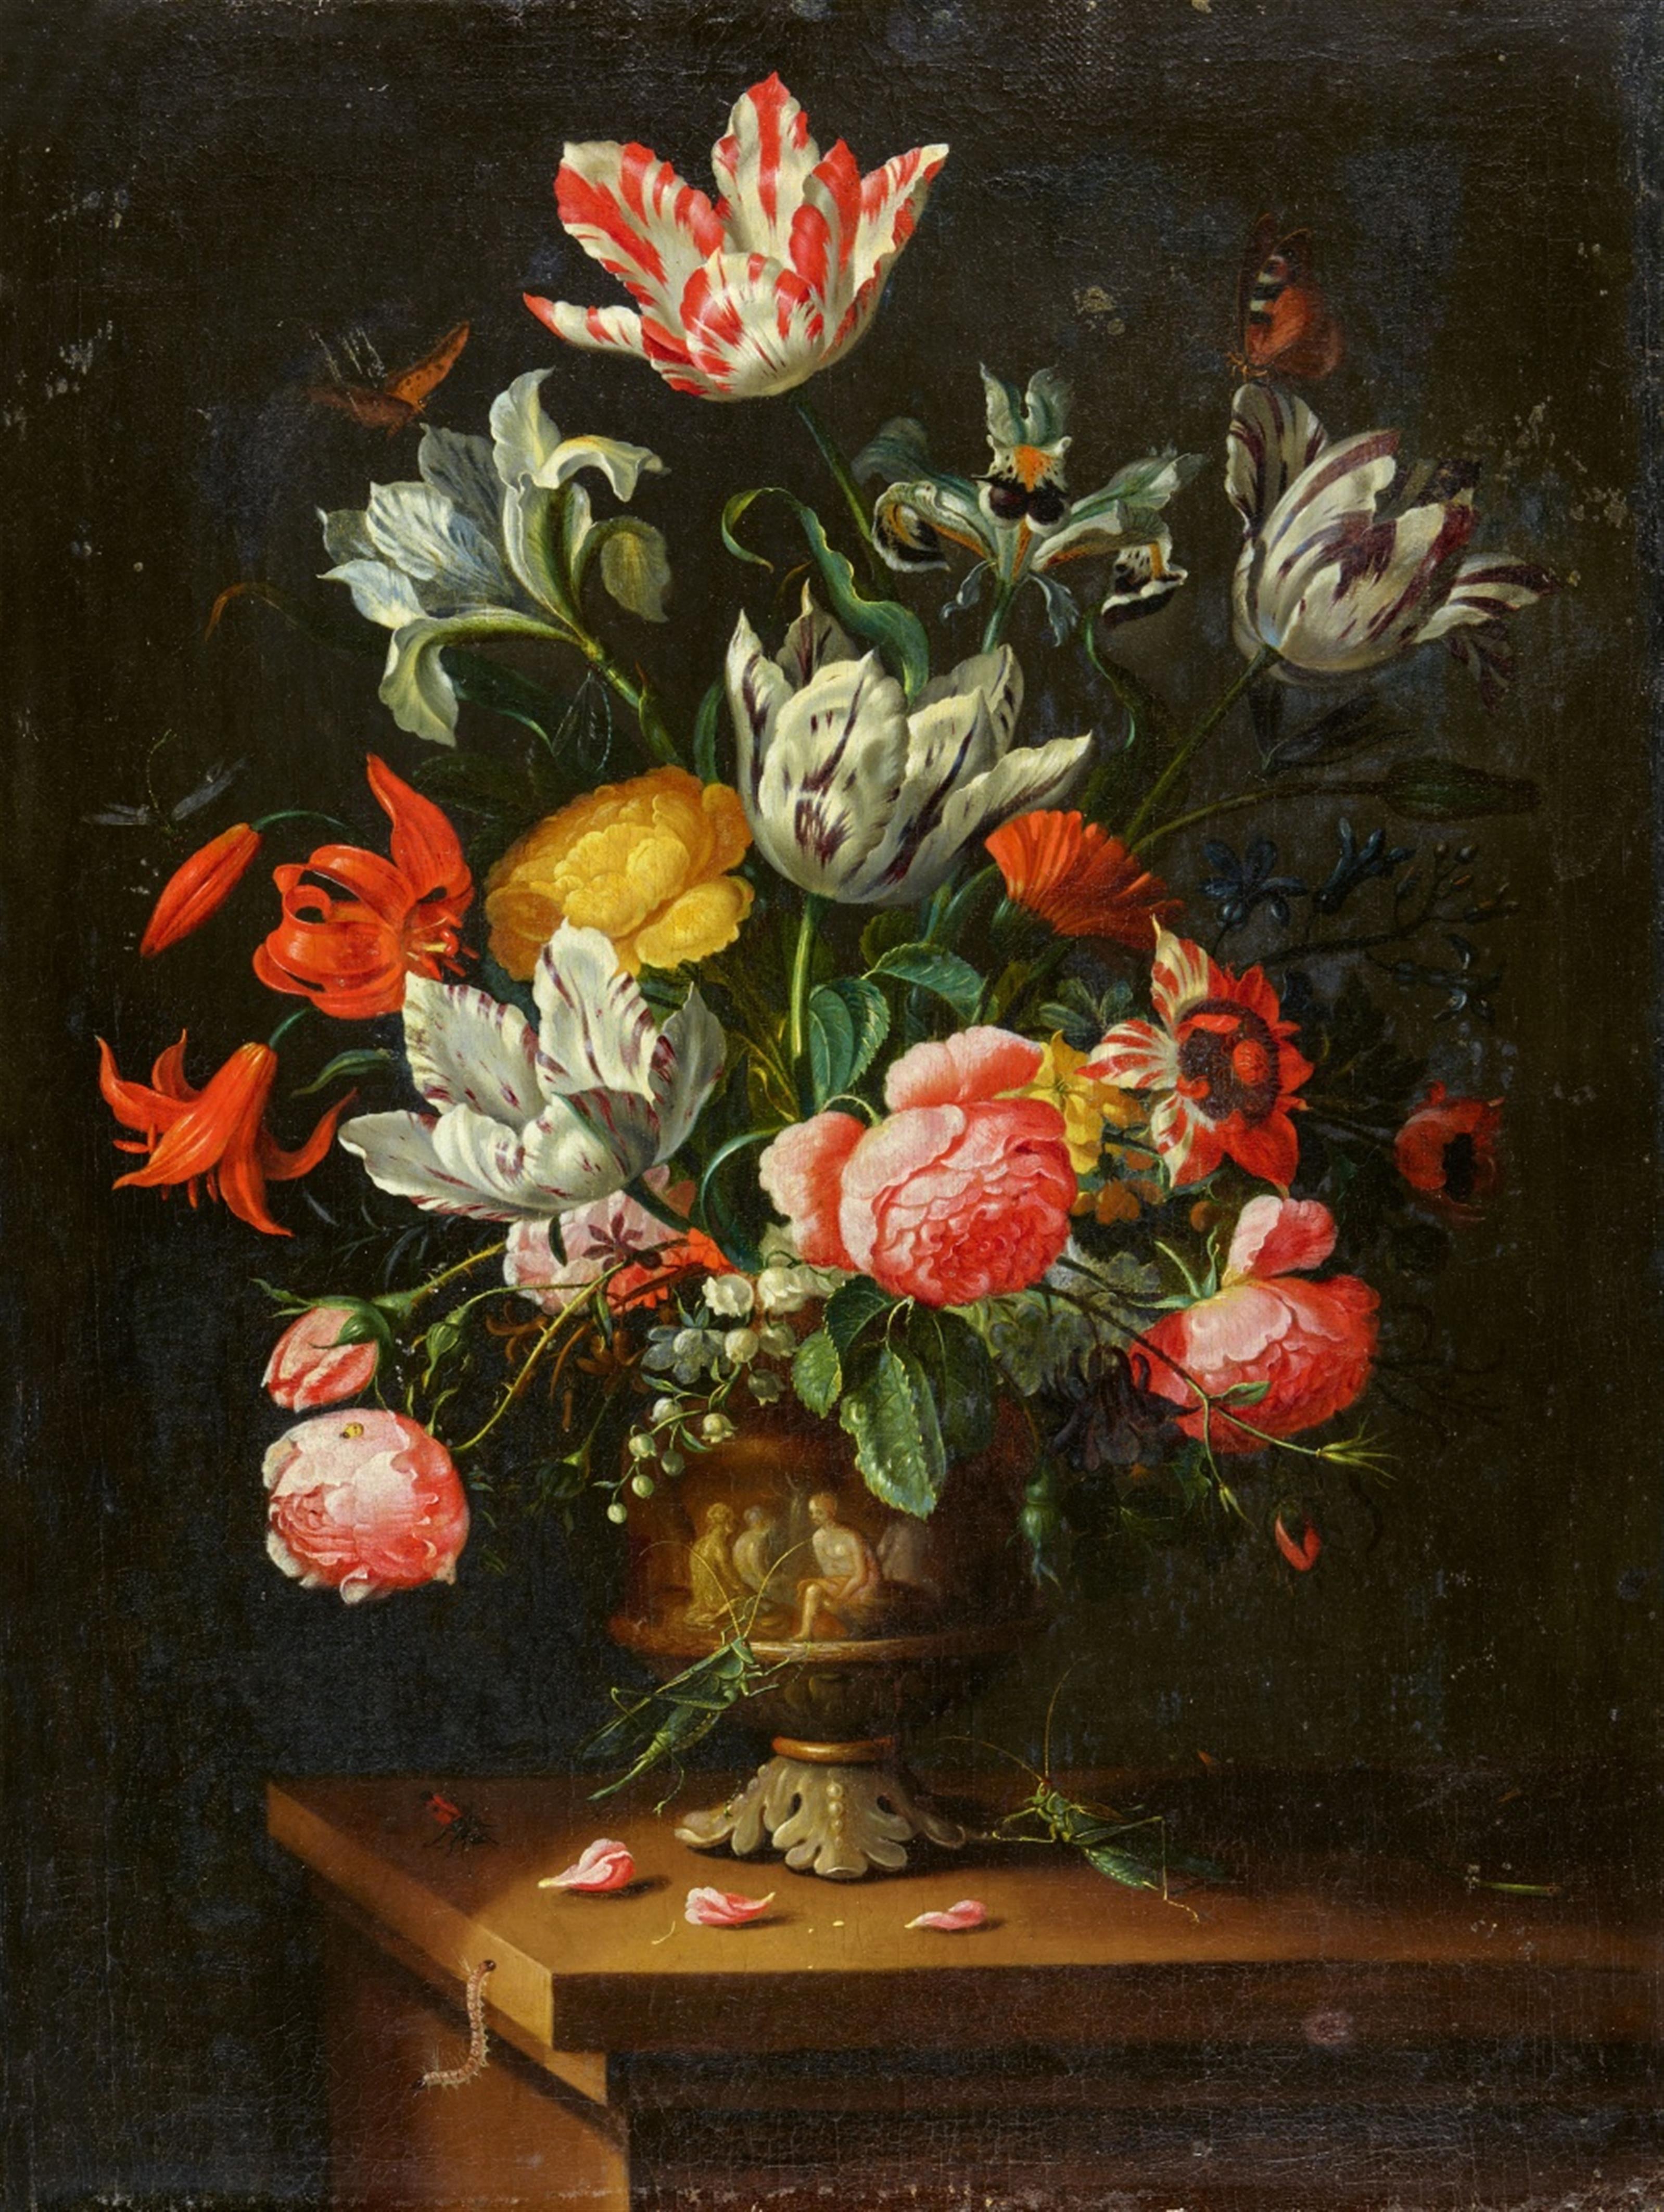 Jean-Baptiste Morel - Flower Still Life with Roses, Tulips, a Lily, and a Caterpillar on a Tabletop - image-1